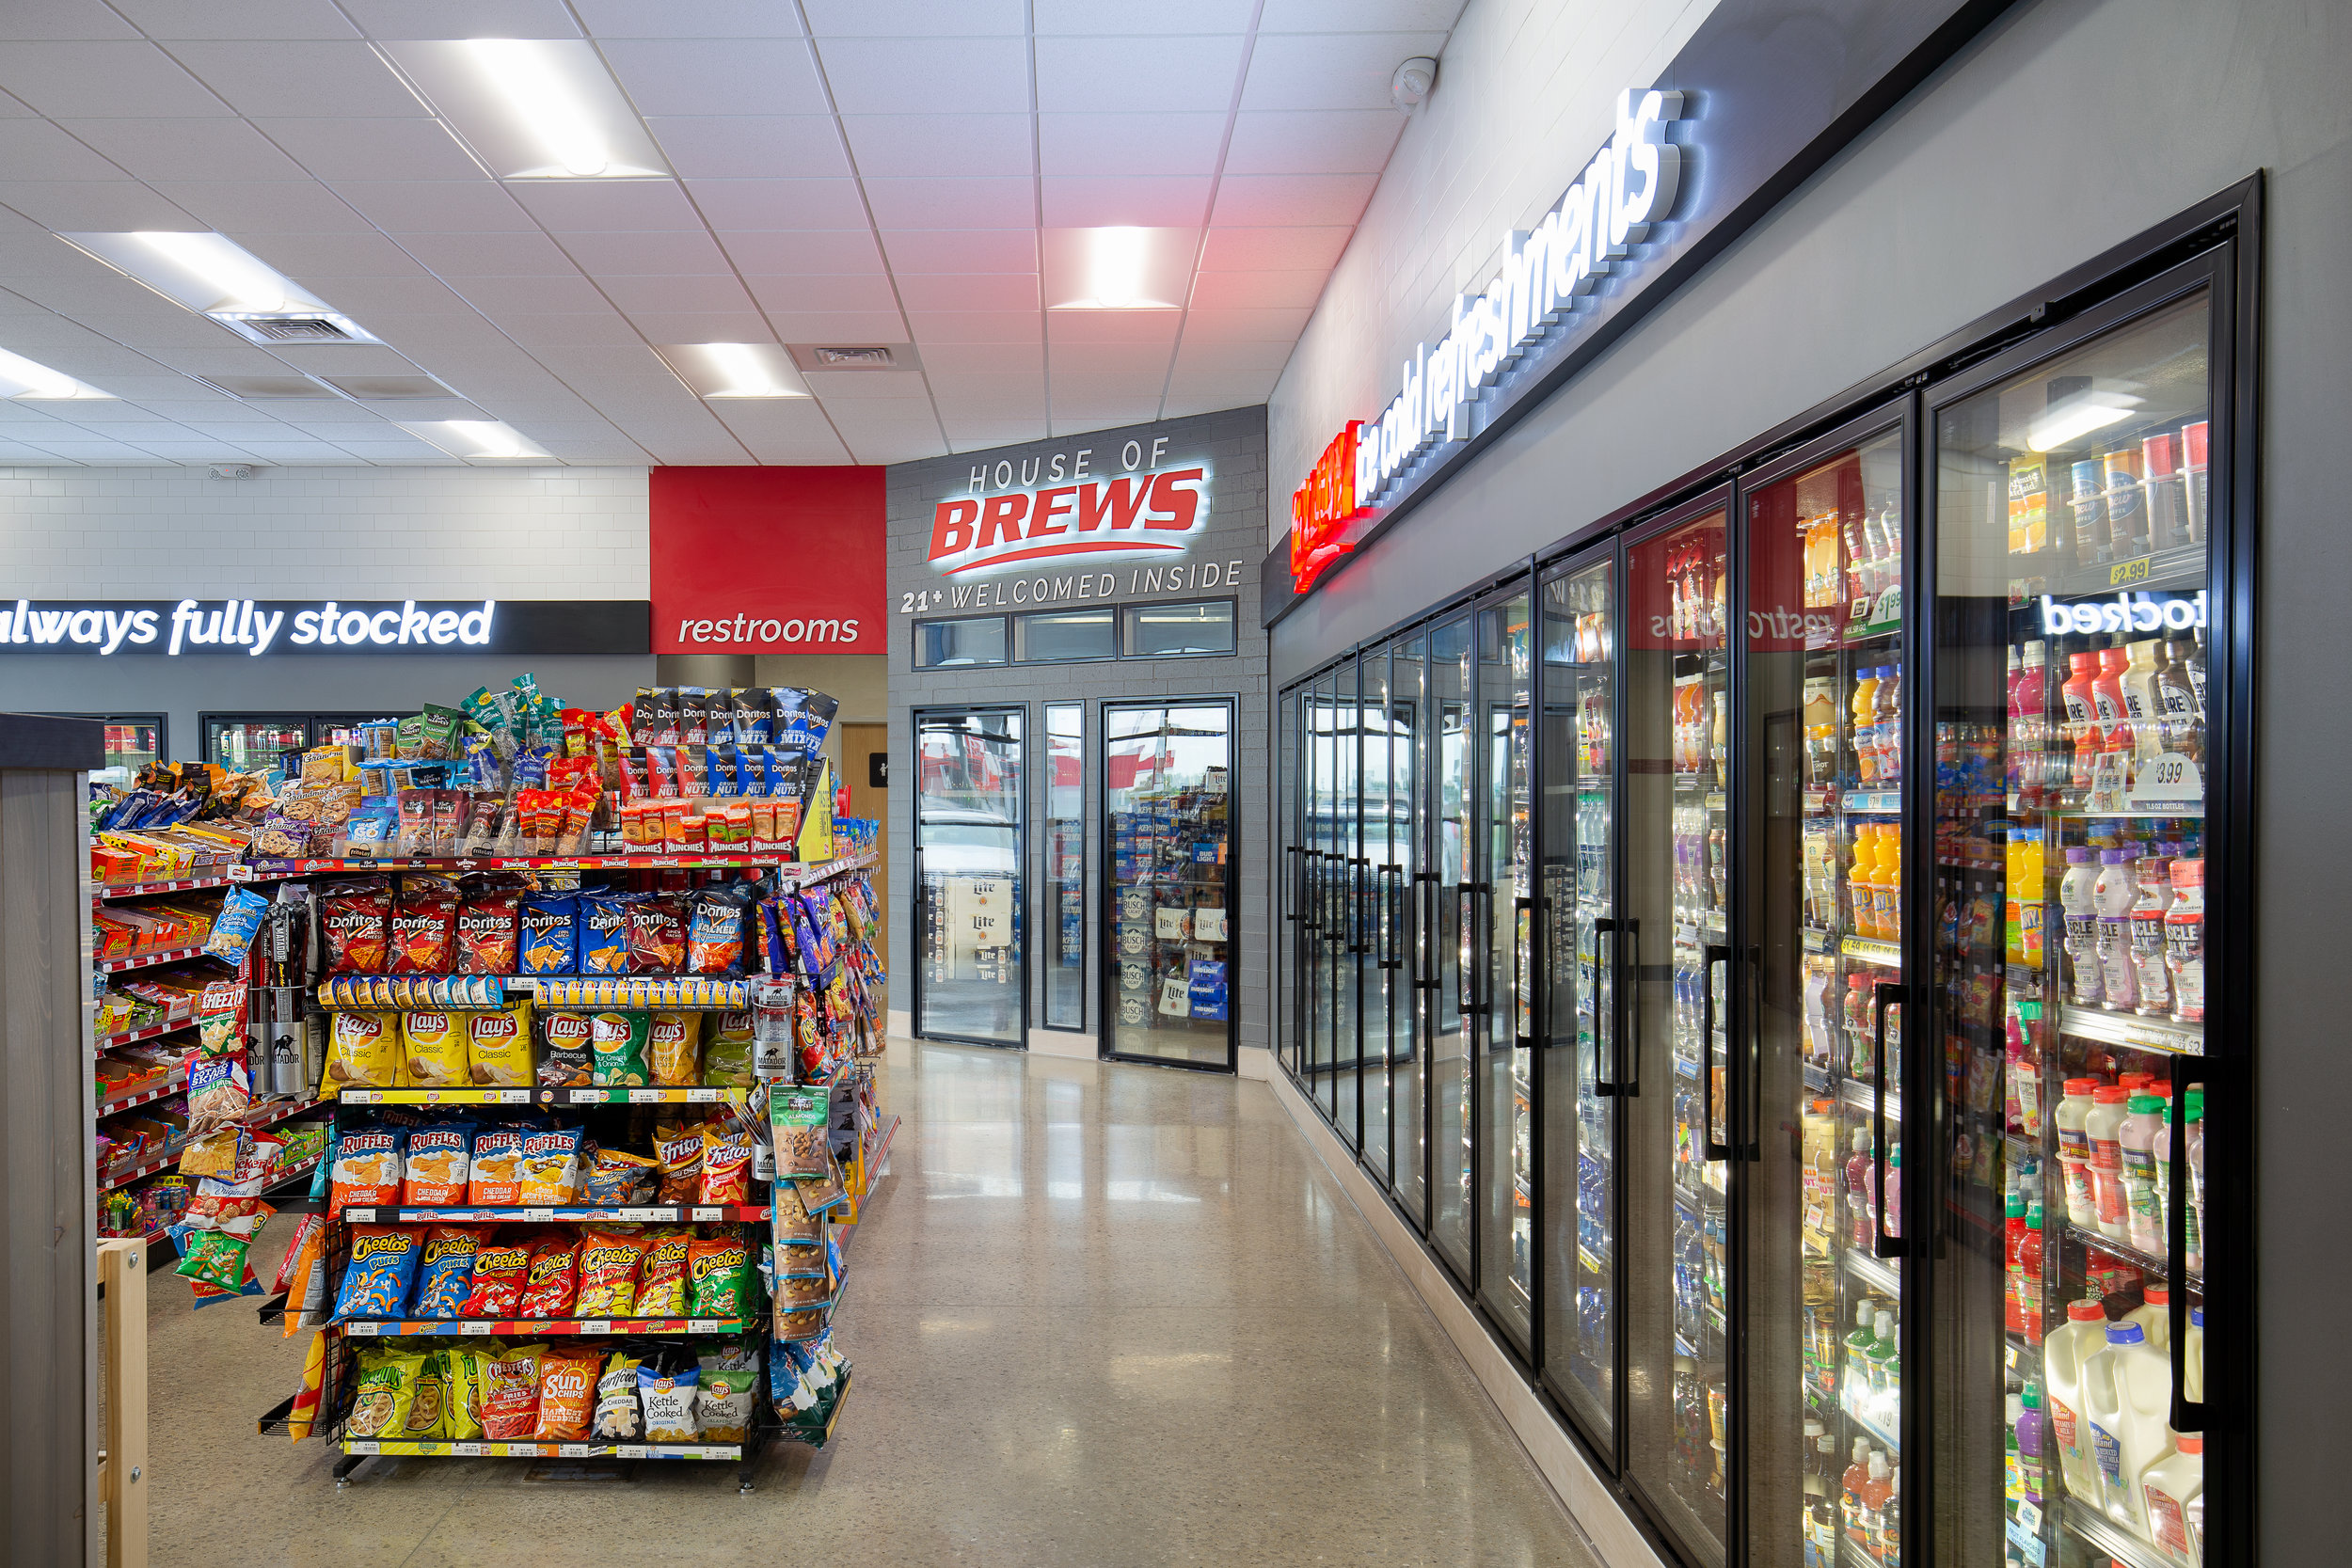 11_ThompsonPhotography_20180607_Pete's+Convenience+Store (1).jpg